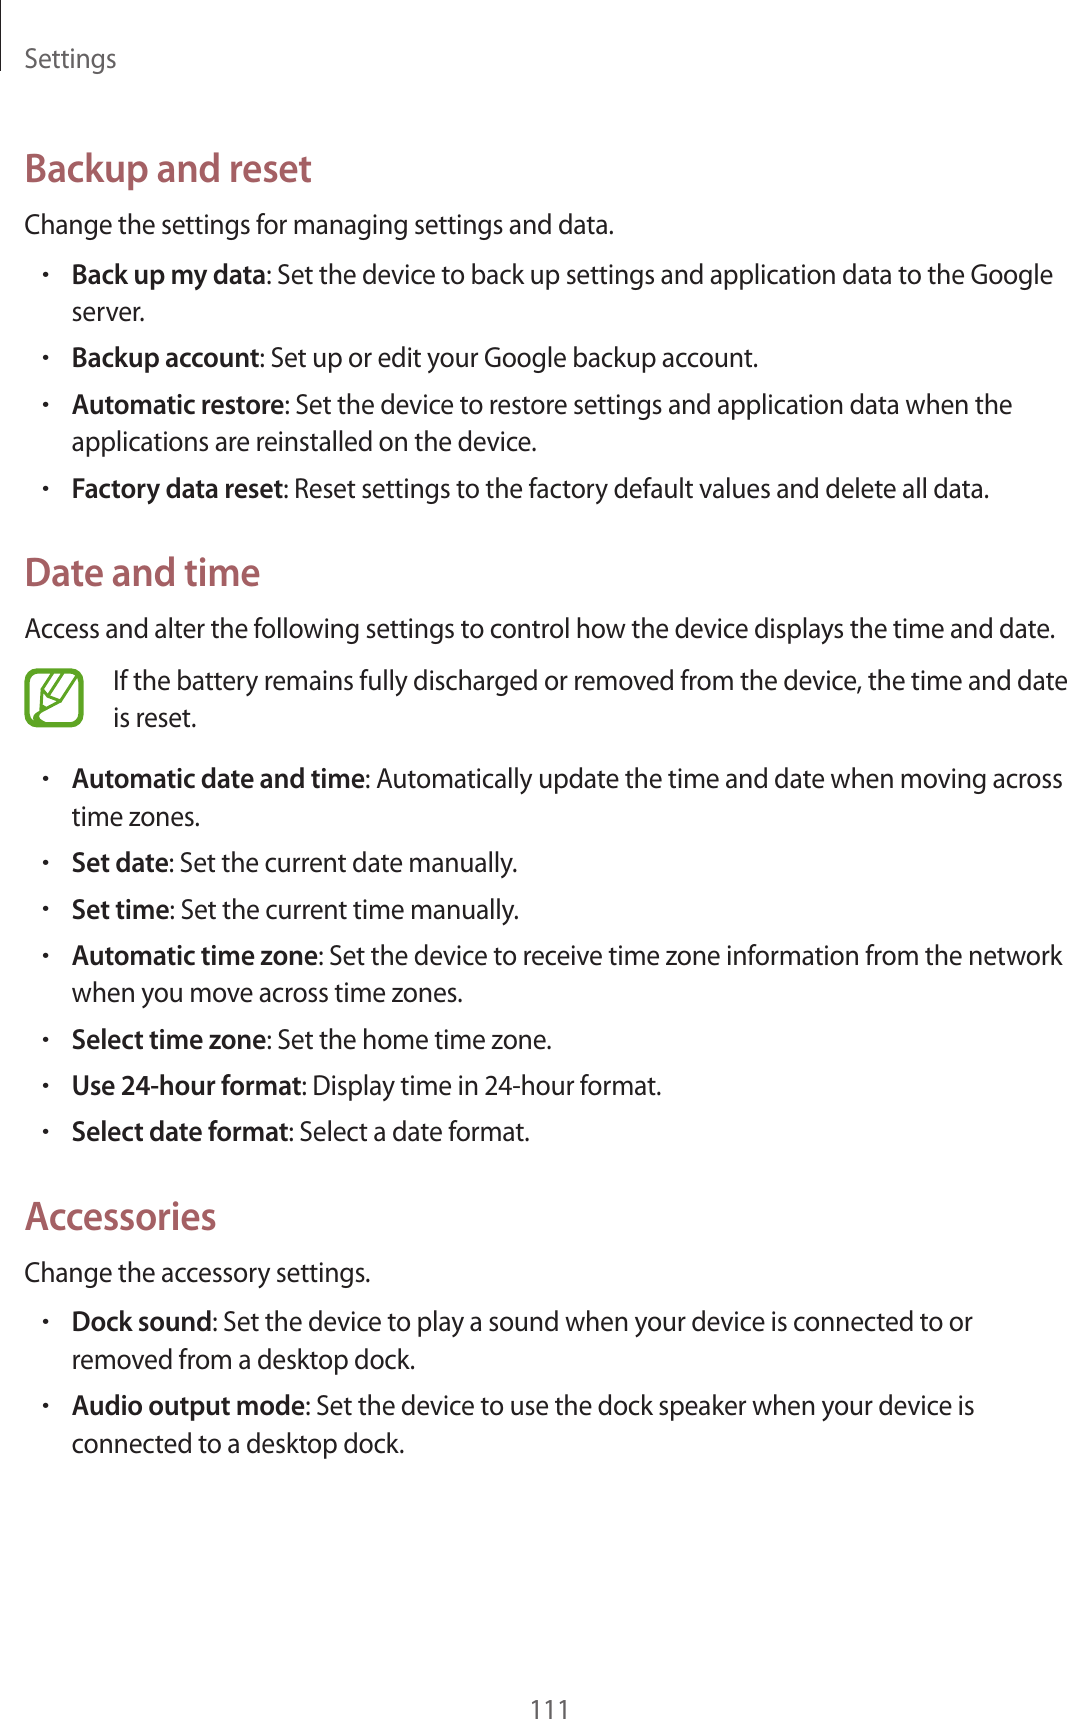 Settings111Backup and resetChange the settings for managing settings and data.•Back up my data: Set the device to back up settings and application data to the Google server.•Backup account: Set up or edit your Google backup account.•Automatic restore: Set the device to restore settings and application data when the applications are reinstalled on the device.•Factory data reset: Reset settings to the factory default values and delete all data.Date and timeAccess and alter the following settings to control how the device displays the time and date.If the battery remains fully discharged or removed from the device, the time and date is reset.•Automatic date and time: Automatically update the time and date when moving across time zones.•Set date: Set the current date manually.•Set time: Set the current time manually.•Automatic time zone: Set the device to receive time zone information from the network when you move across time zones.•Select time zone: Set the home time zone.•Use 24-hour format: Display time in 24-hour format.•Select date format: Select a date format.AccessoriesChange the accessory settings.•Dock sound: Set the device to play a sound when your device is connected to or removed from a desktop dock.•Audio output mode: Set the device to use the dock speaker when your device is connected to a desktop dock.